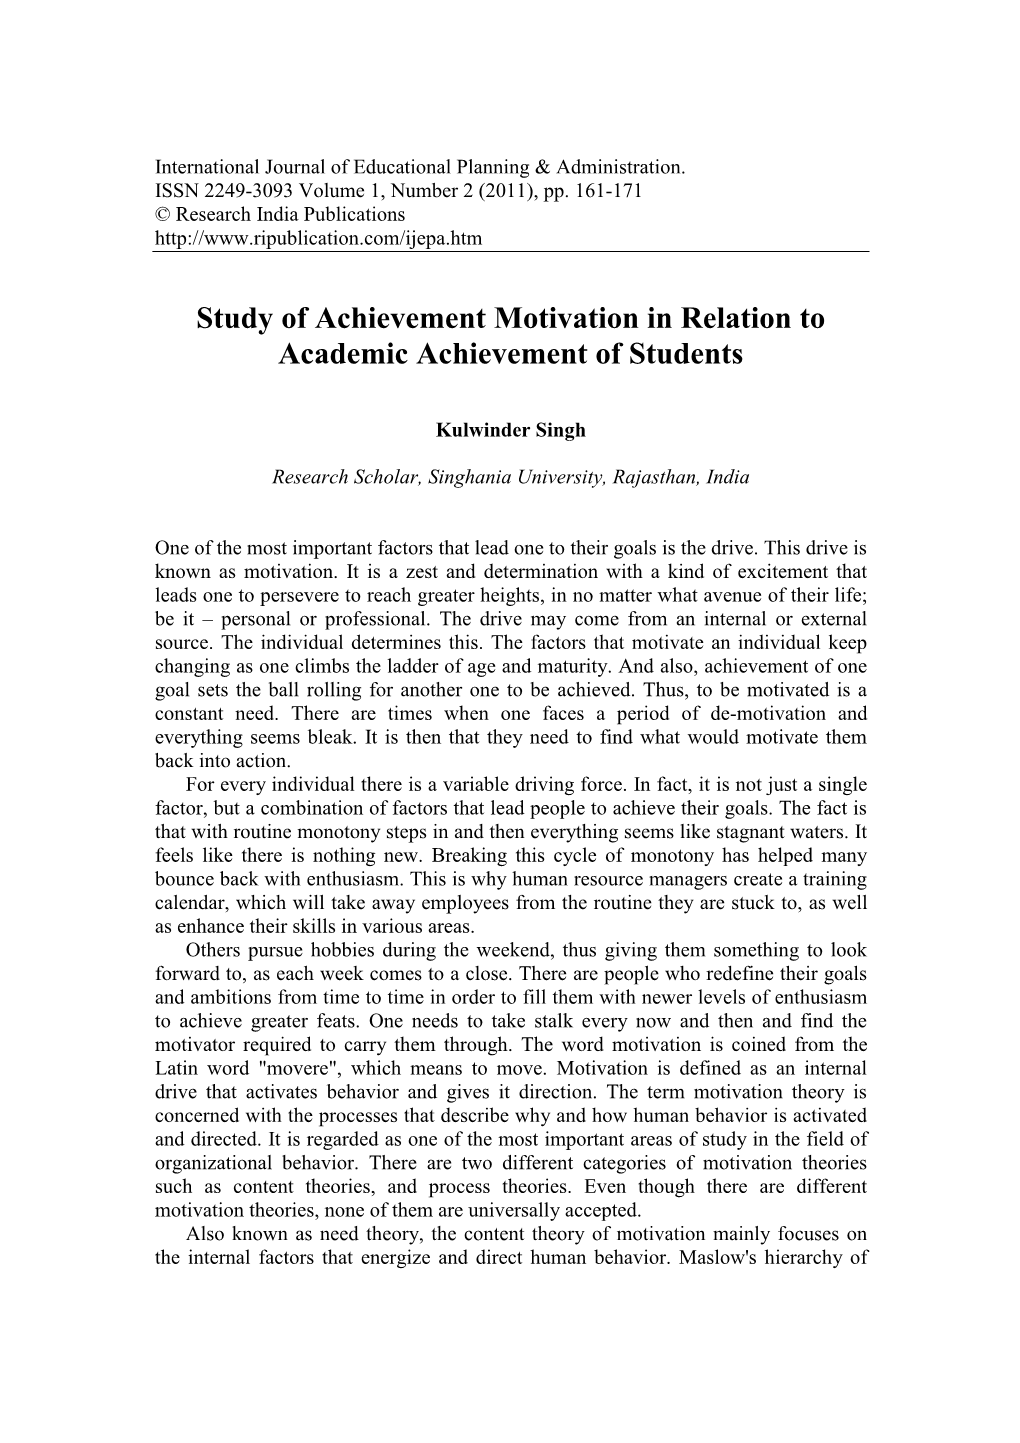 Study of Achievement Motivation in Relation to Academic Achievement of Students